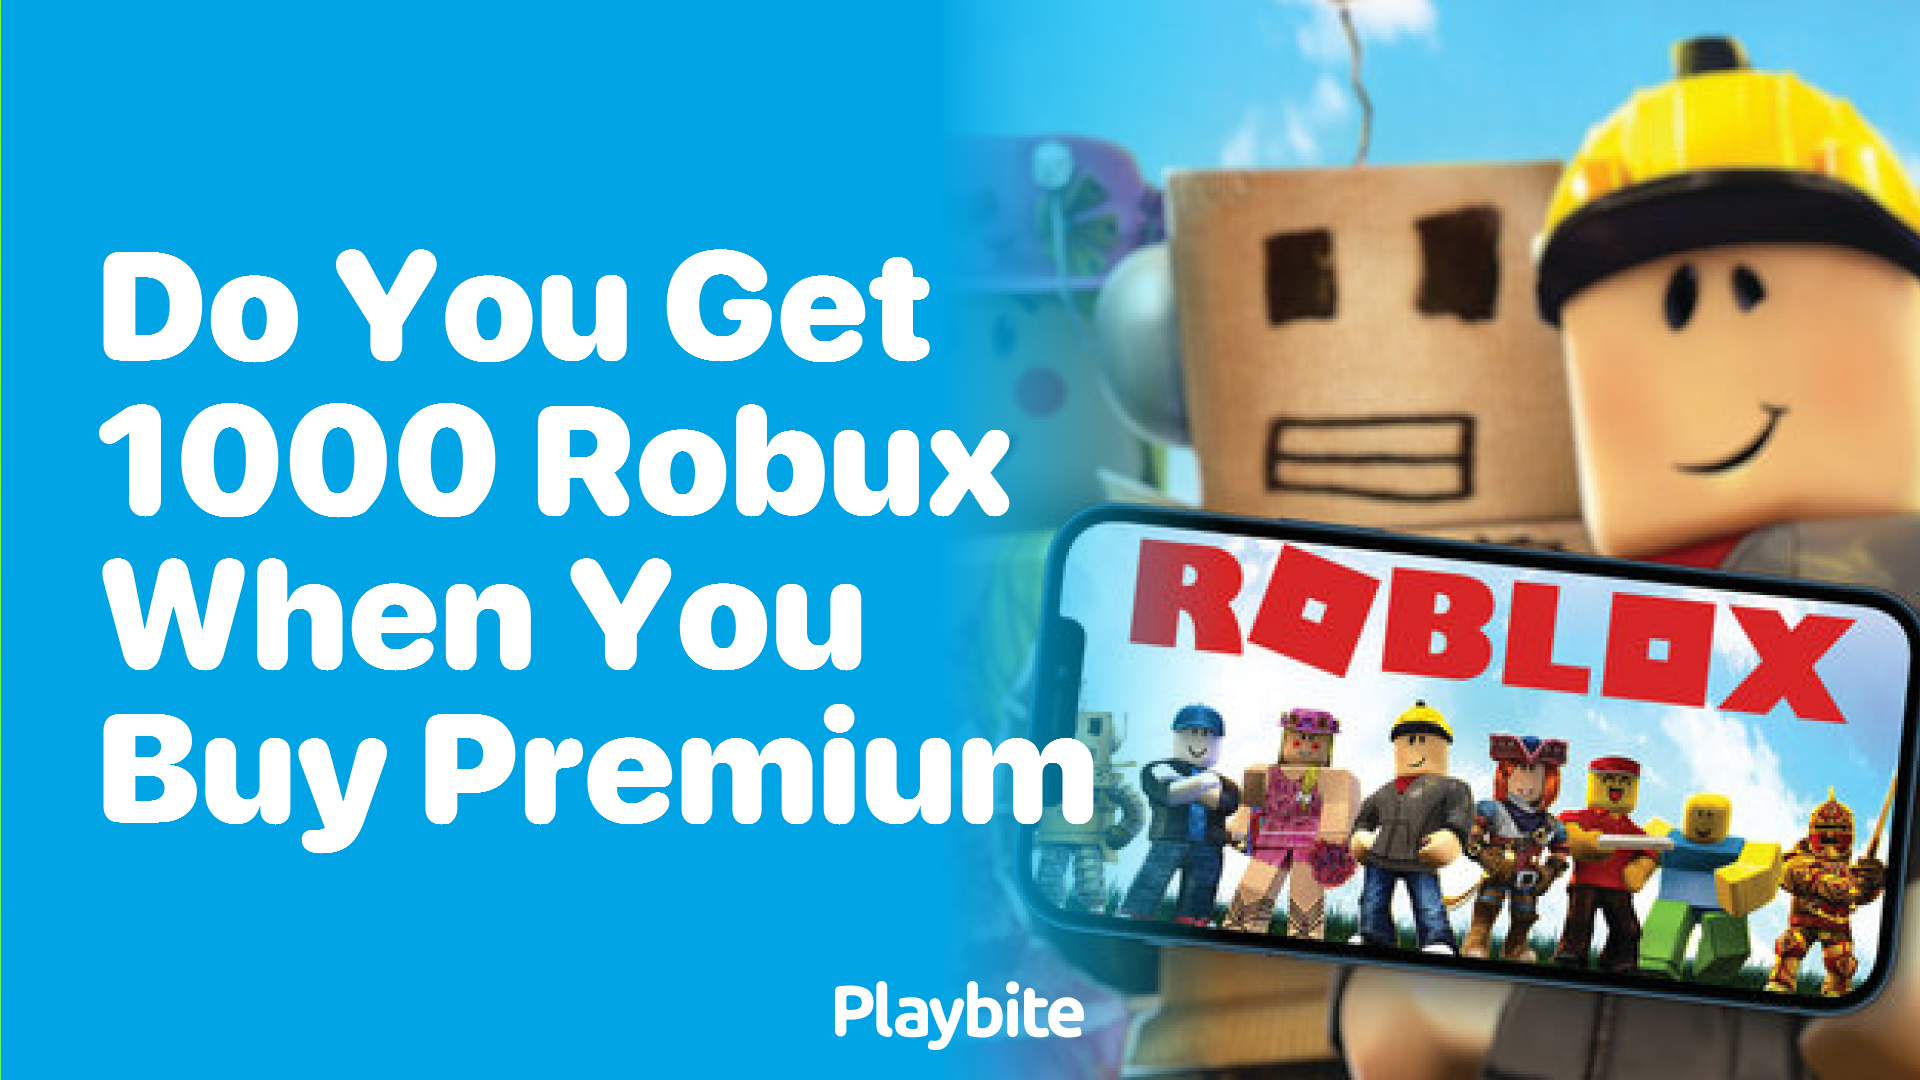 Do You Get 1000 Robux When You Buy Premium on Roblox? - Playbite